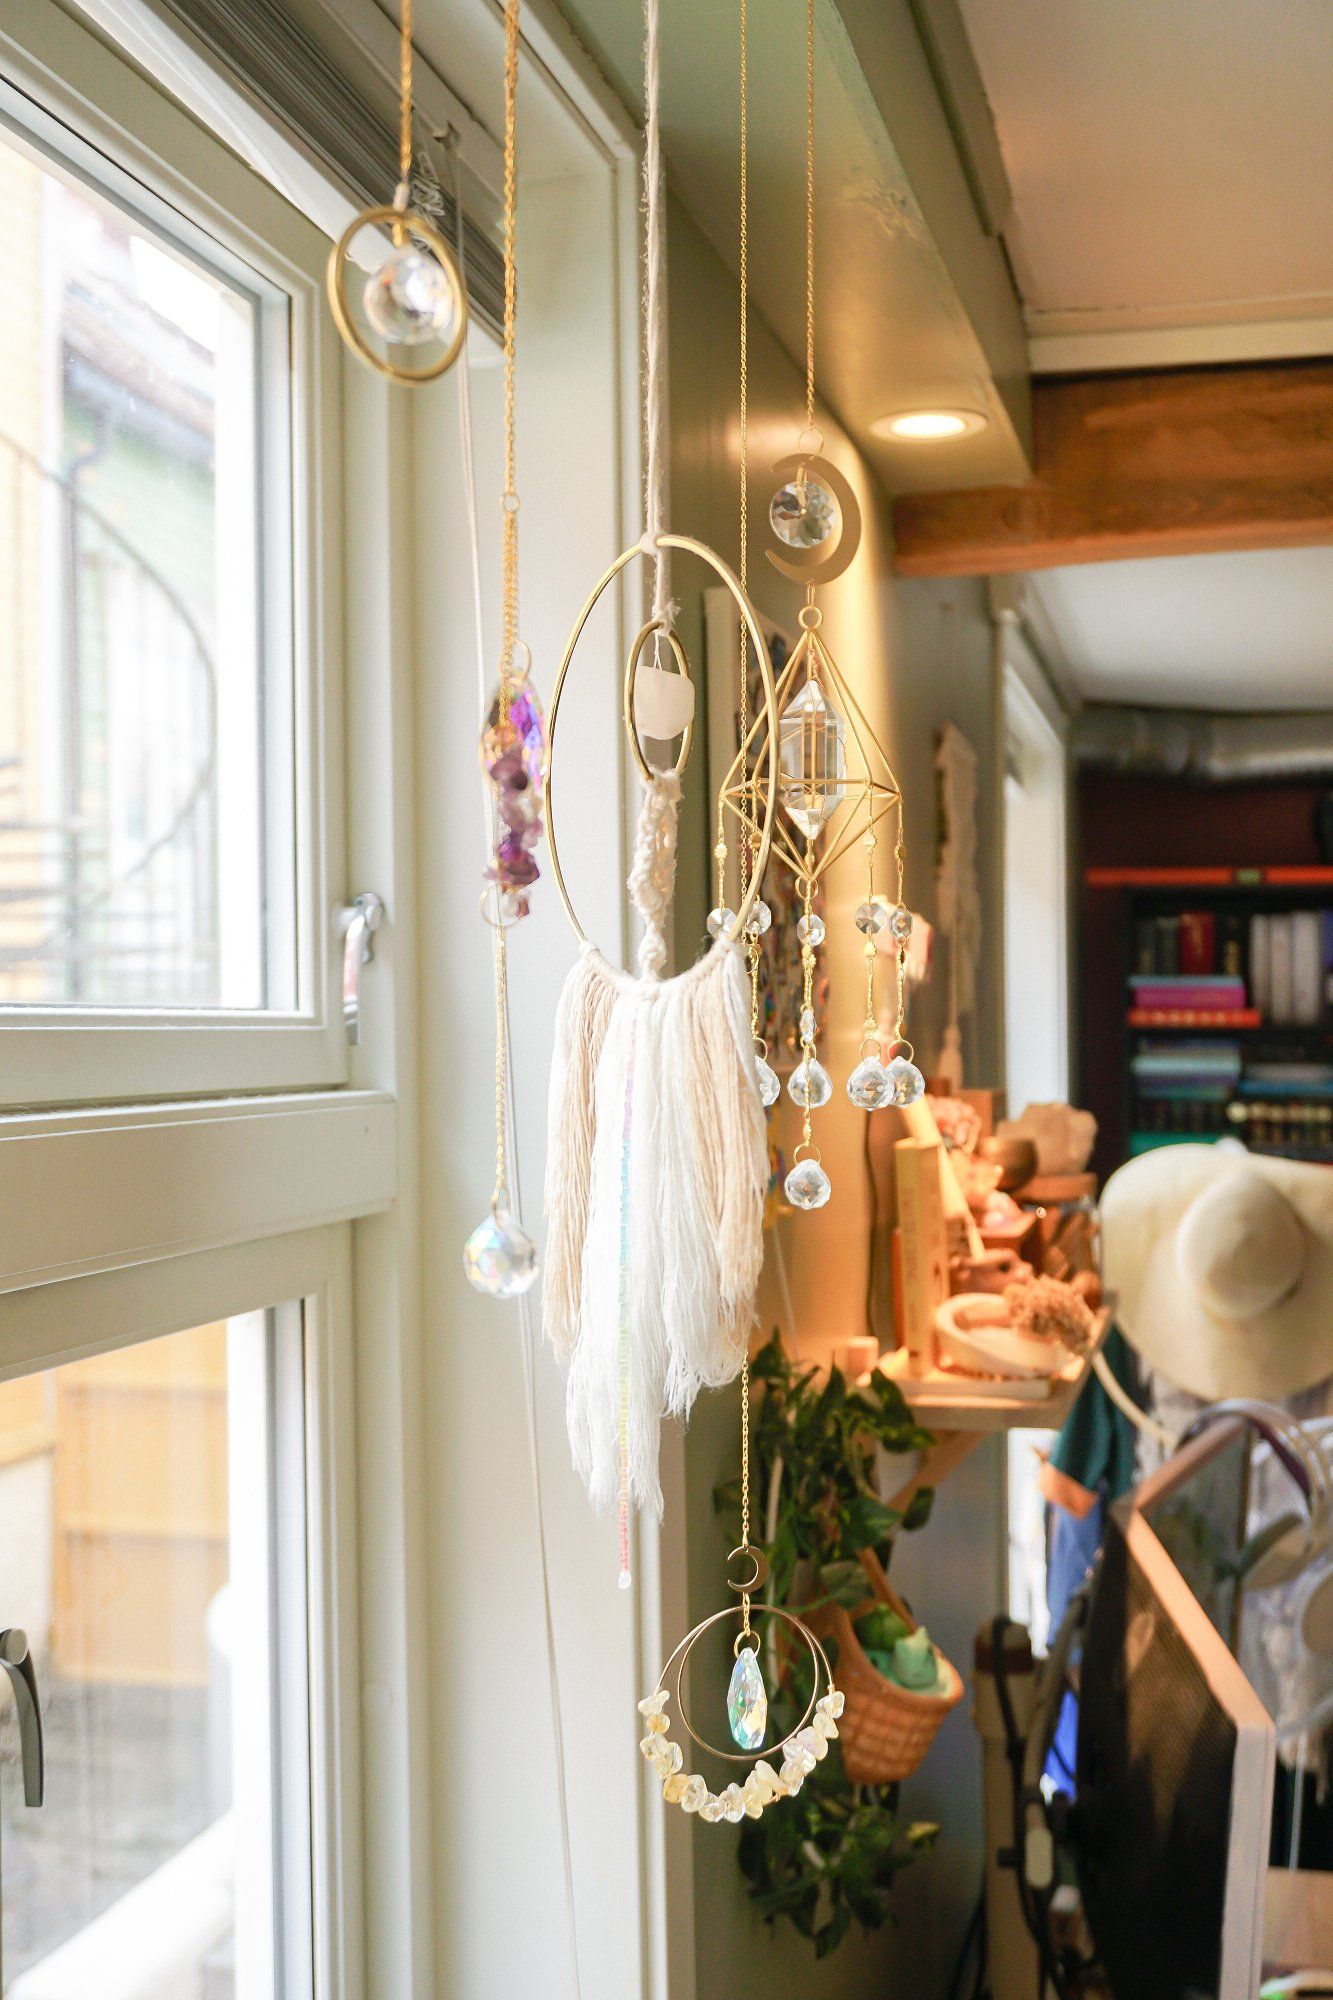 Sun catchers hanging in front of a window in a home office